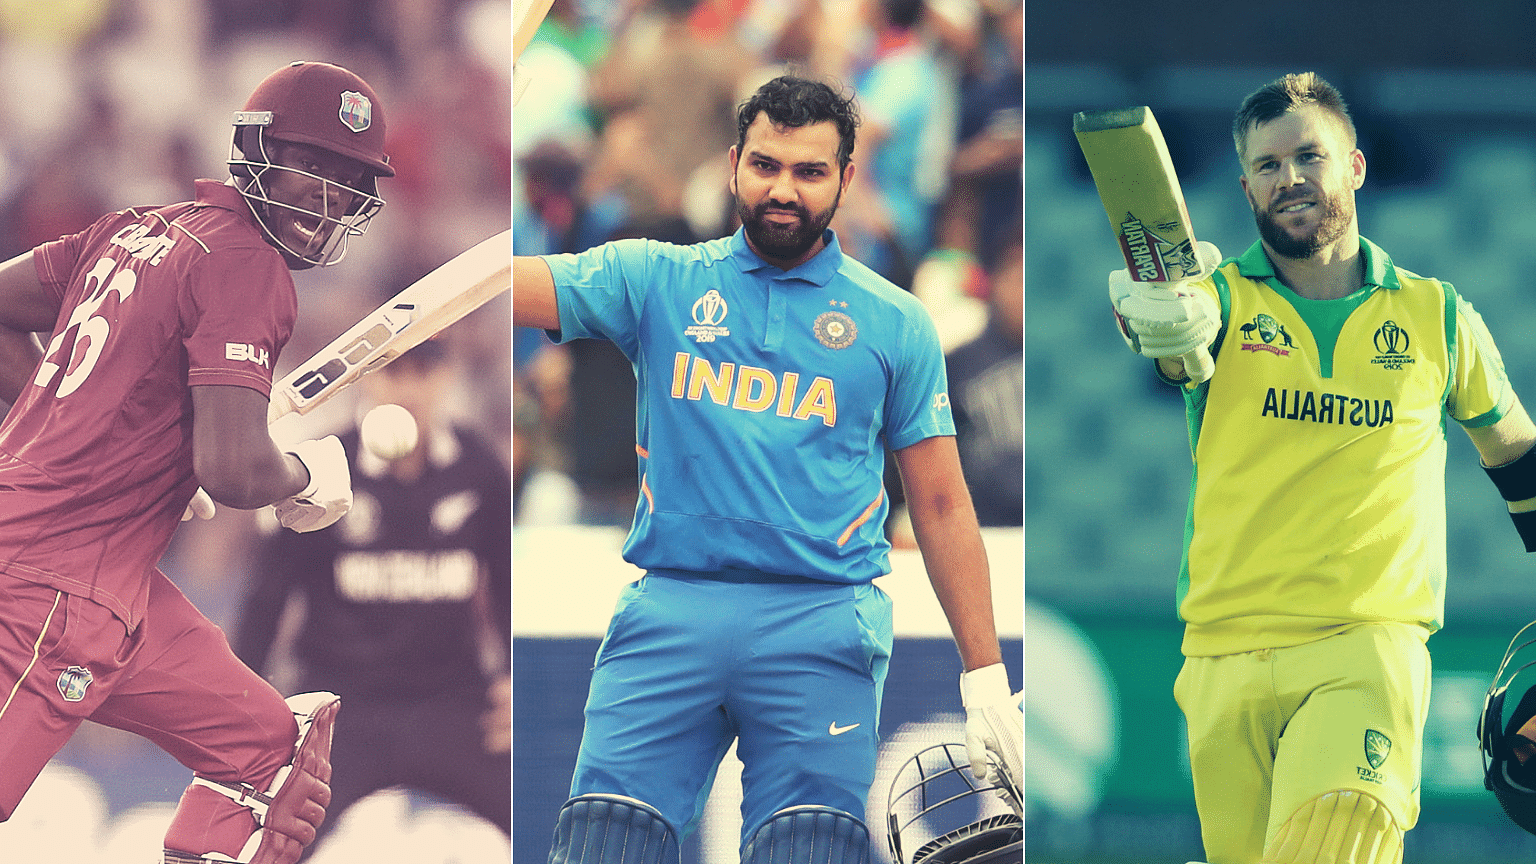 Top innings of ICC World Cup 2019, including those of Carlos Brathwaite, Rohit Sharma and David Warner.